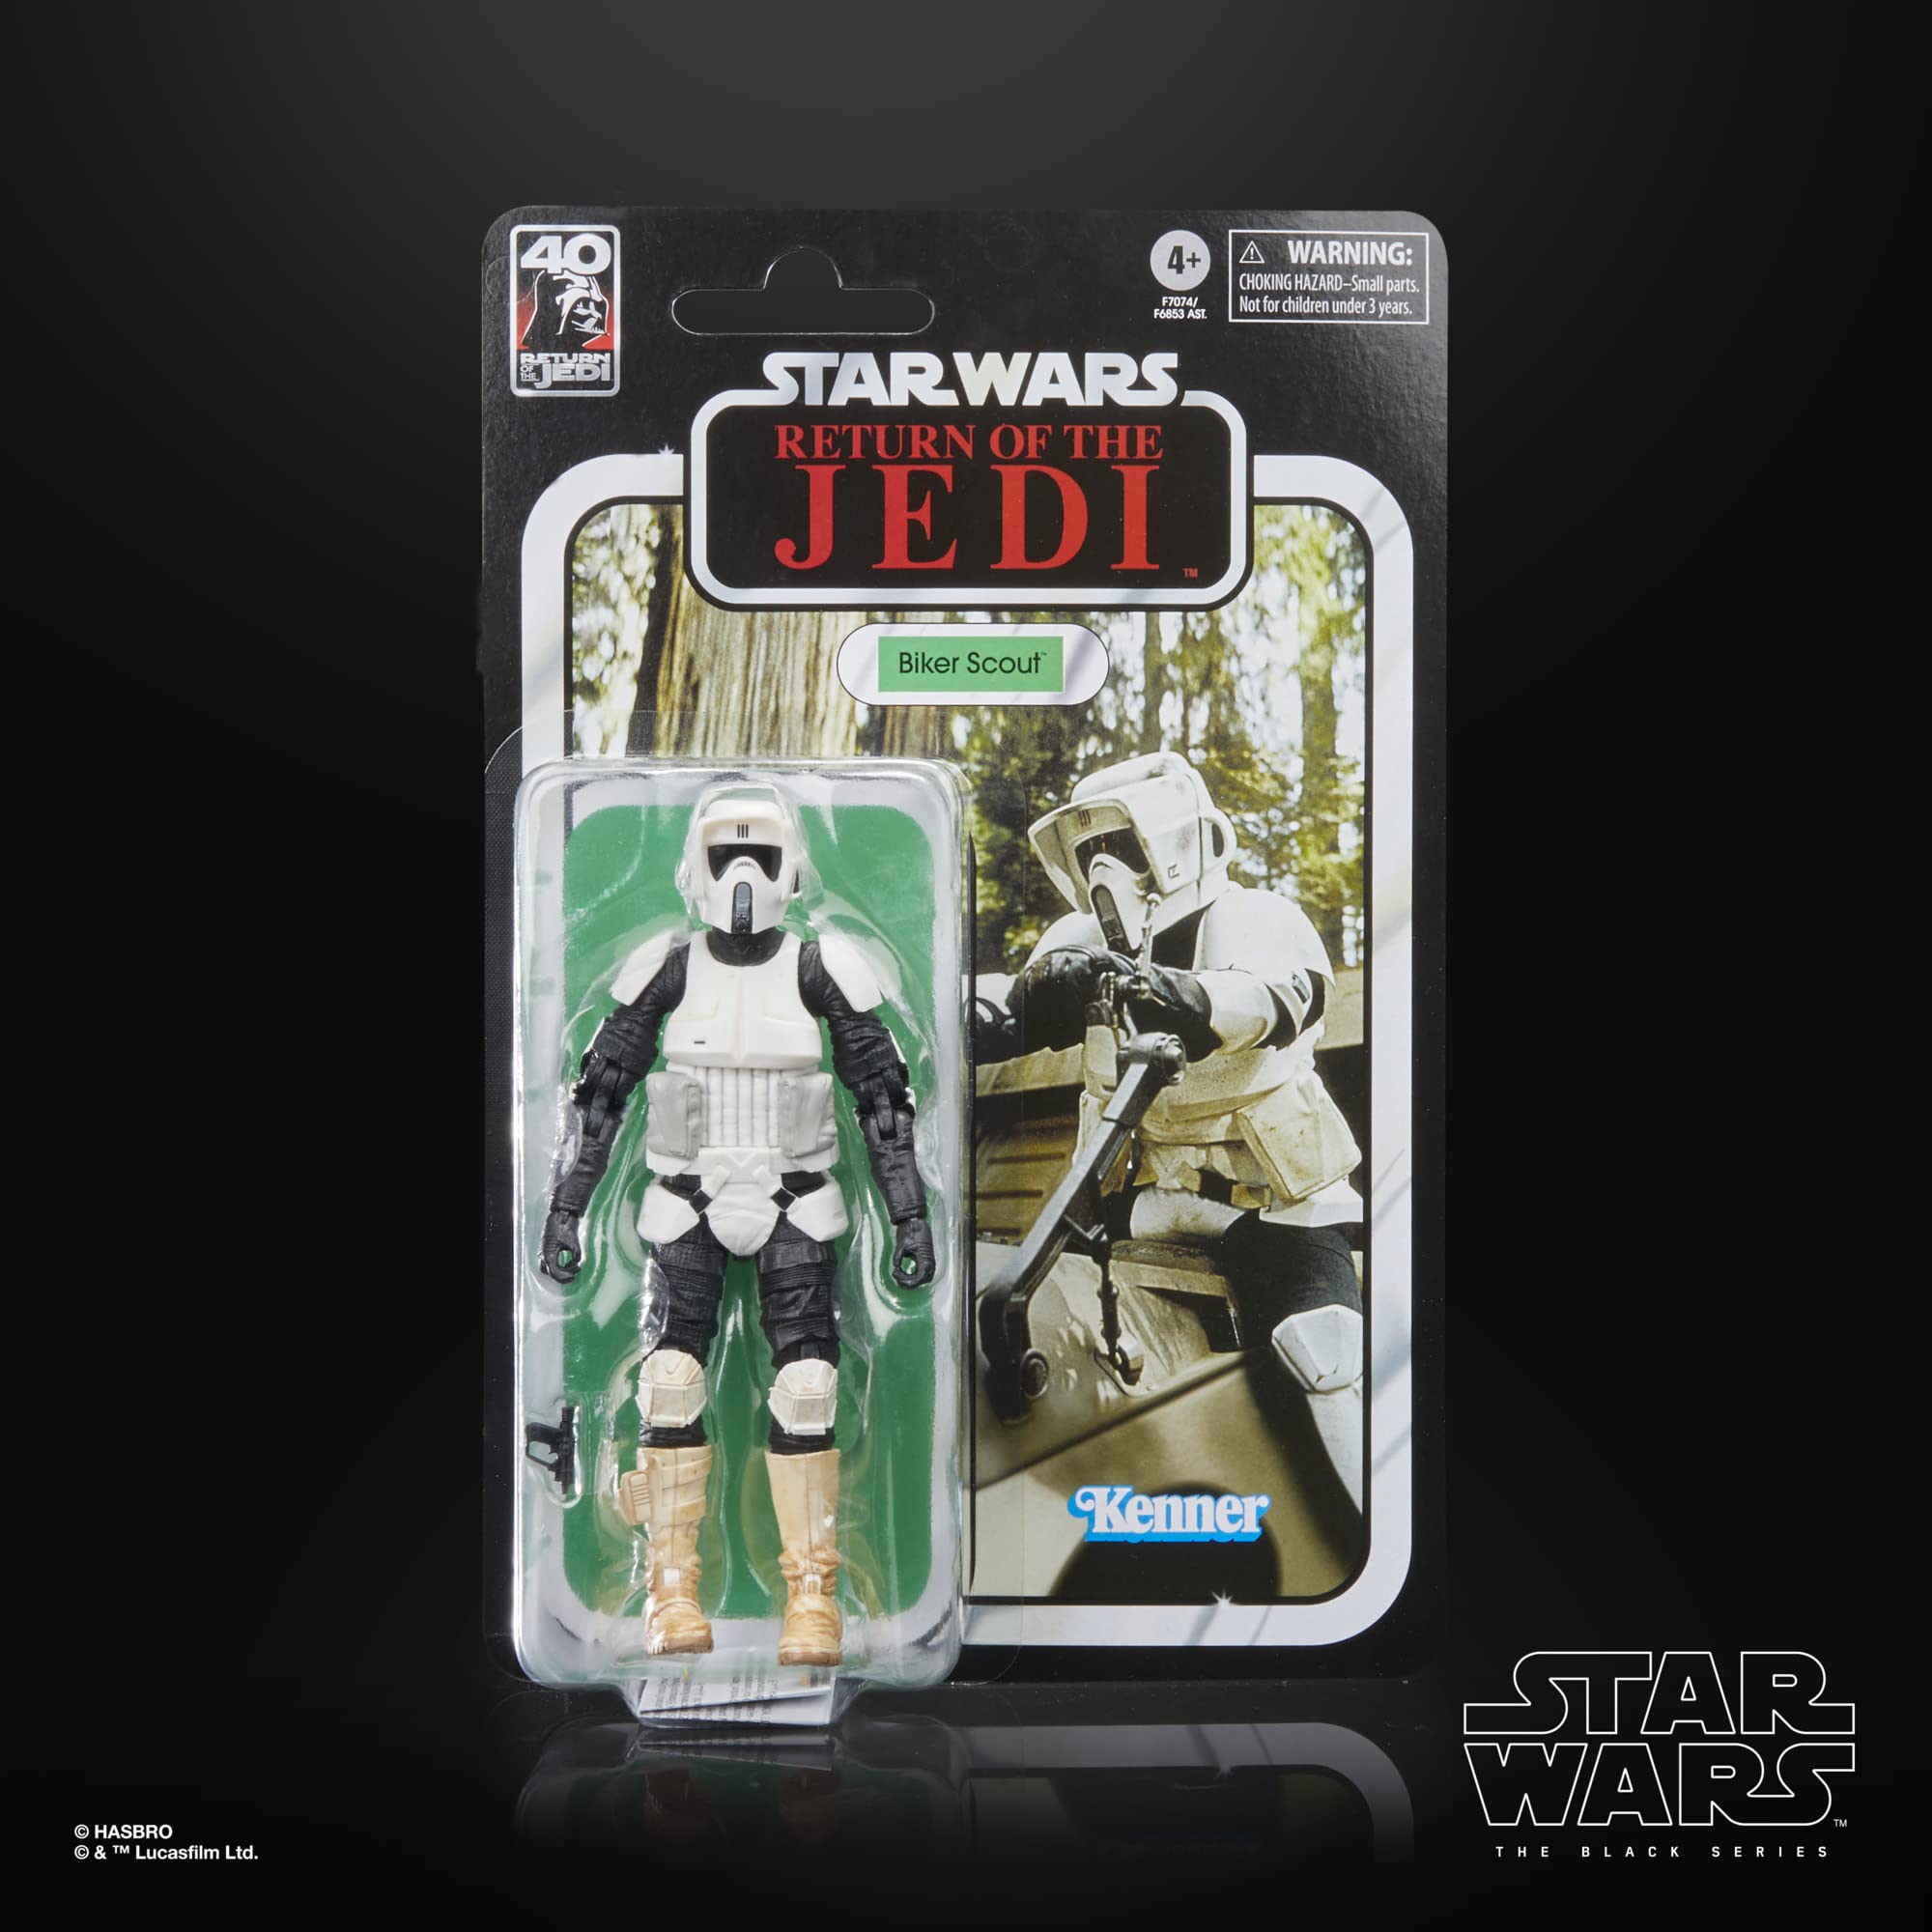 STAR WARS The Black Series Biker Scout, Return of The Jedi 40th Anniversary 6-Inch Collectible Action Figures, Ages 4 and Up (F7074)